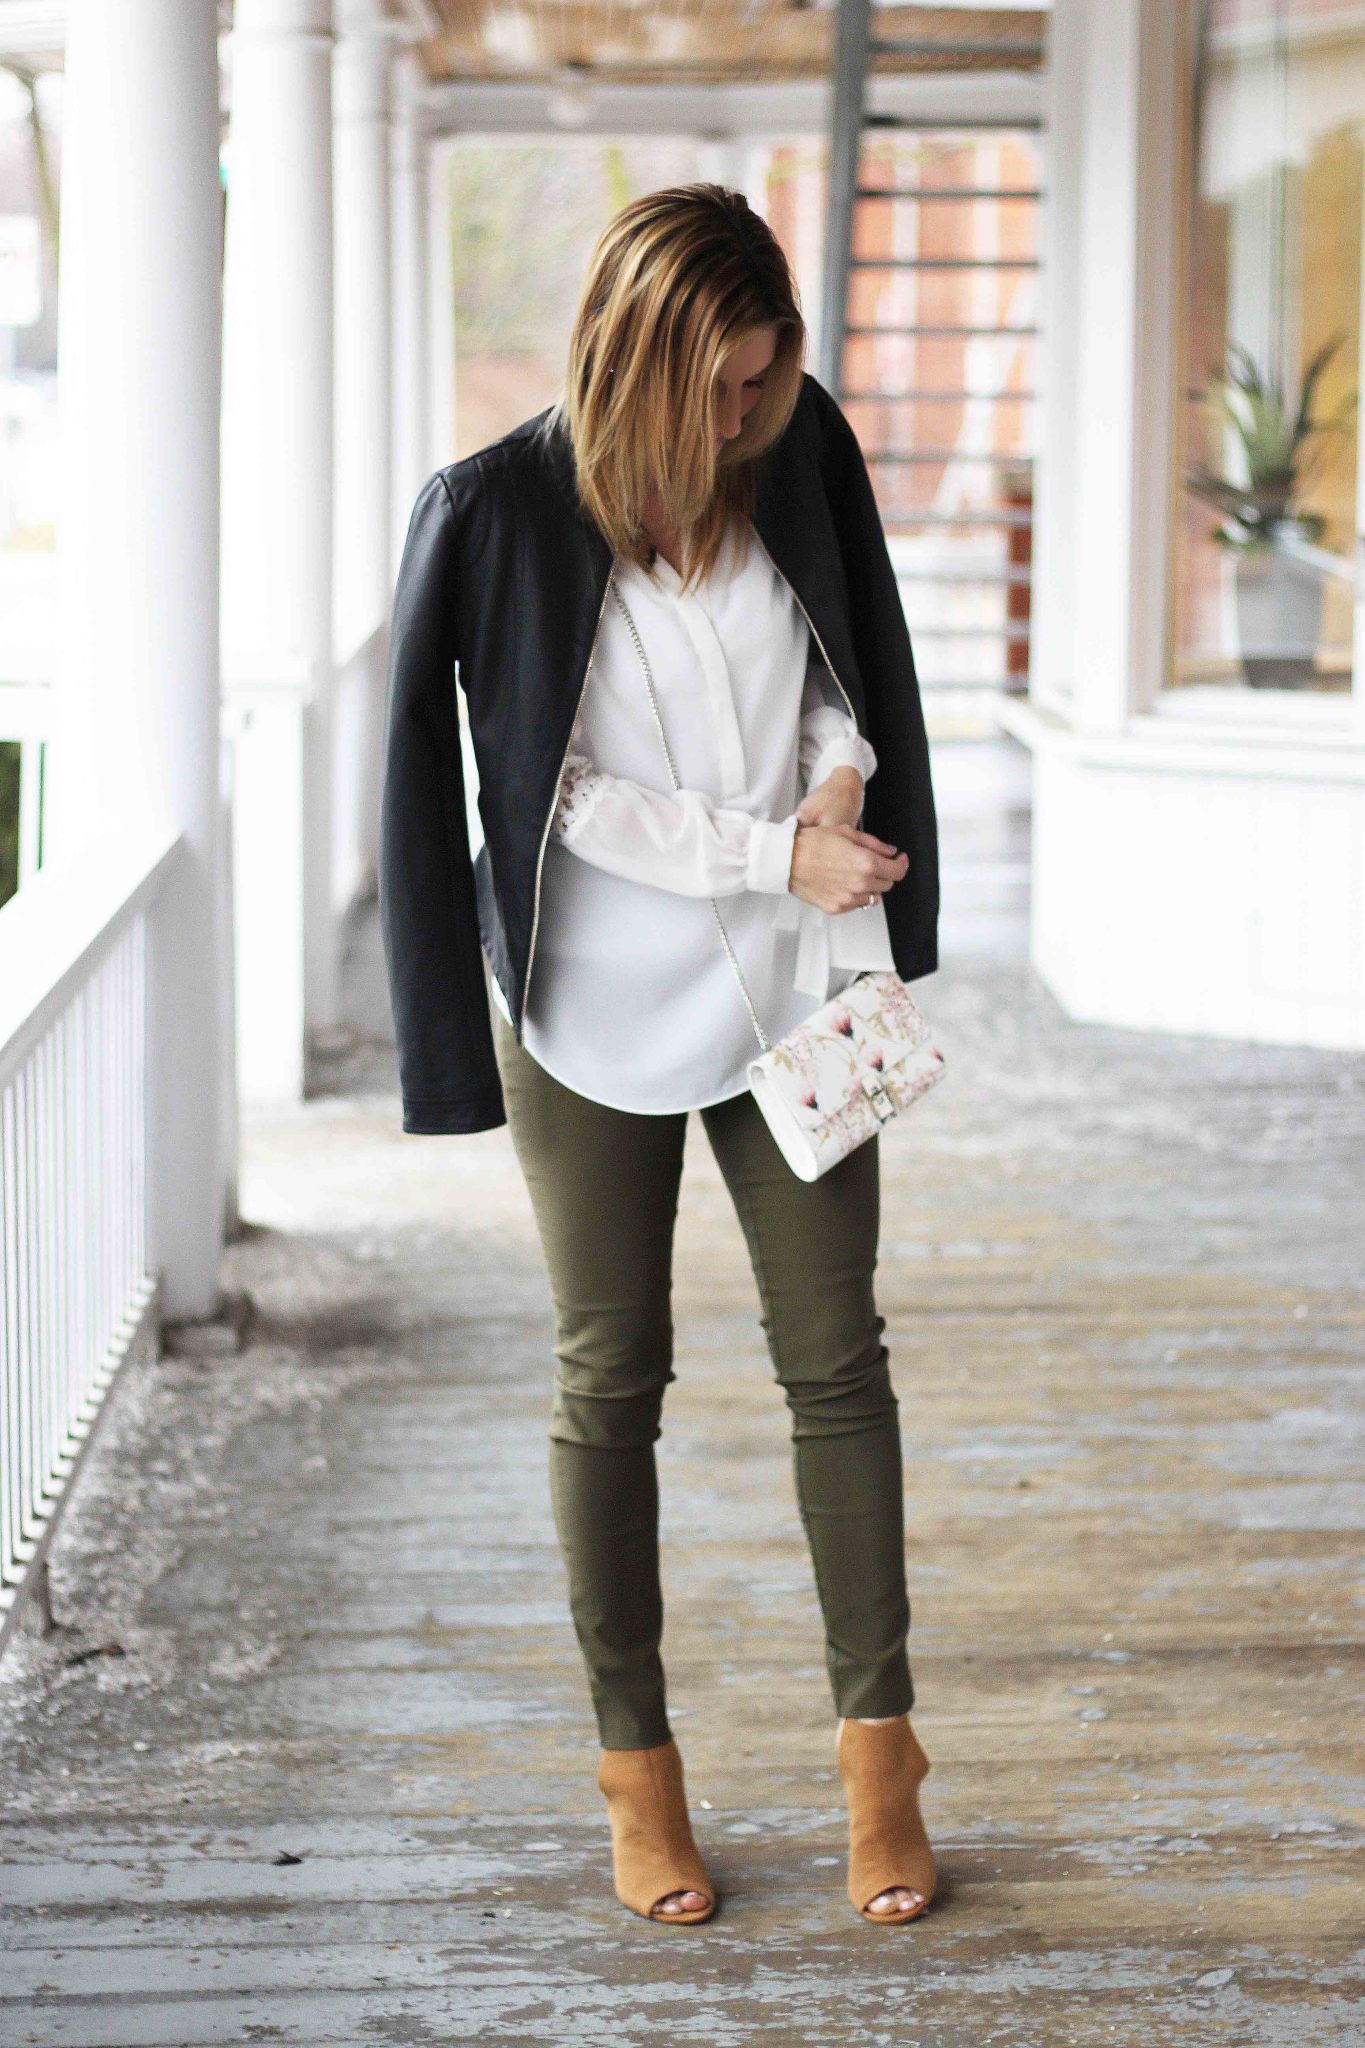 Spring Look From Le Chateau, White peasant blouse, olive green pants, black leather jacket, floral cross body bag, Suede peep toe shootie